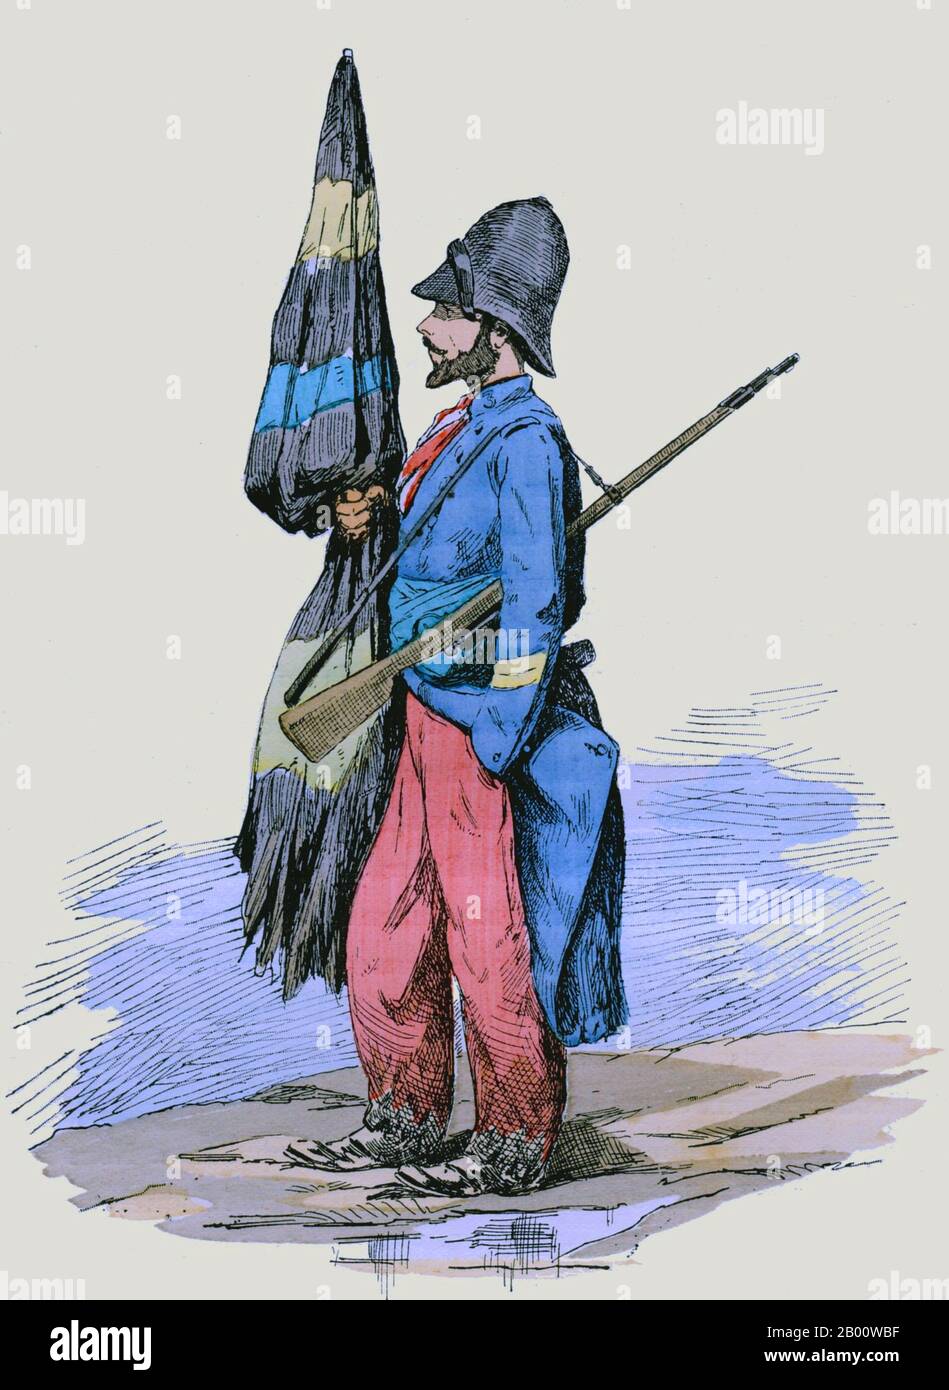 Taiwan: Soldier of the French Foreign Legion at Keelung (Chilung), Taiwan. Illustration by Maurice Rollet de l'Isle (1859-1943), 1885.  The French Foreign Legion (French: Legion etrangere) is a unique military unit in the French Army established in 1831. The legion was specifically created for foreign nationals wishing to serve in the French Armed Forces, but commanded by French officers. However, it is also open to French citizens, who amounted to 24% of the recruits as of 2007. Stock Photo